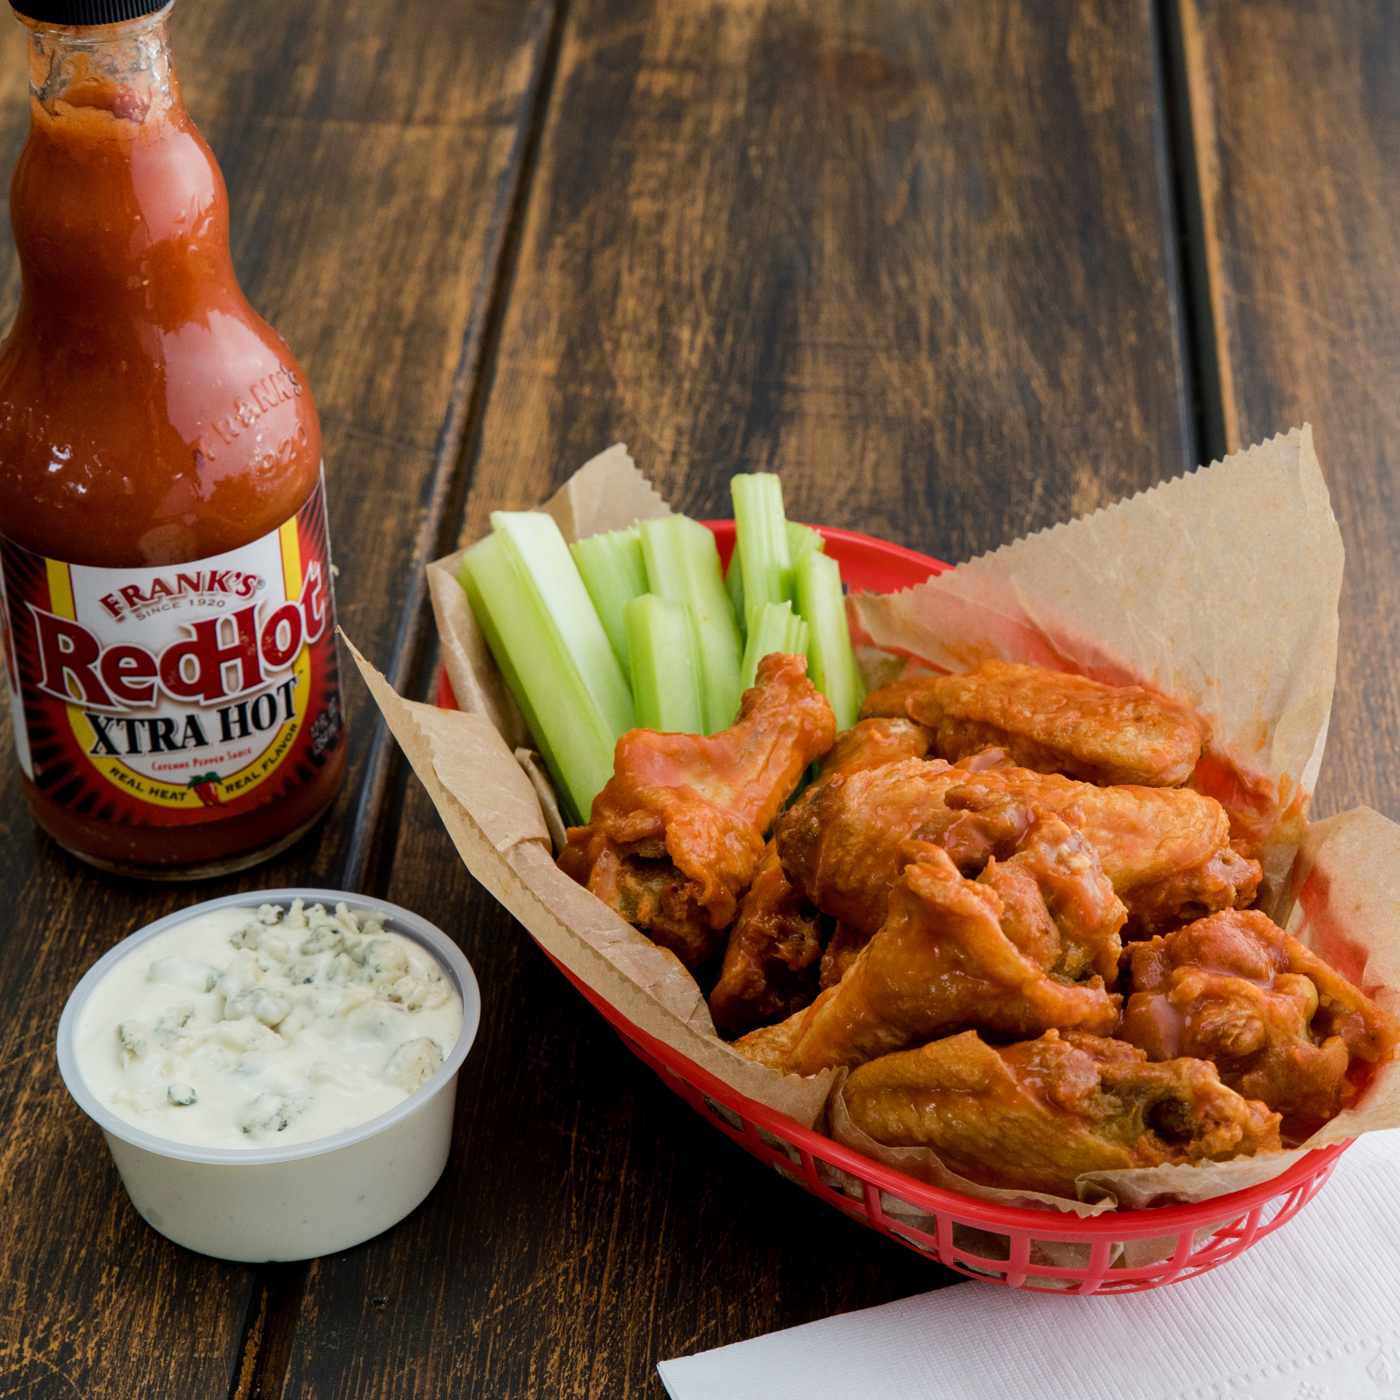 Frank's RedHot Xtra Hot Sauce; image 2 of 2